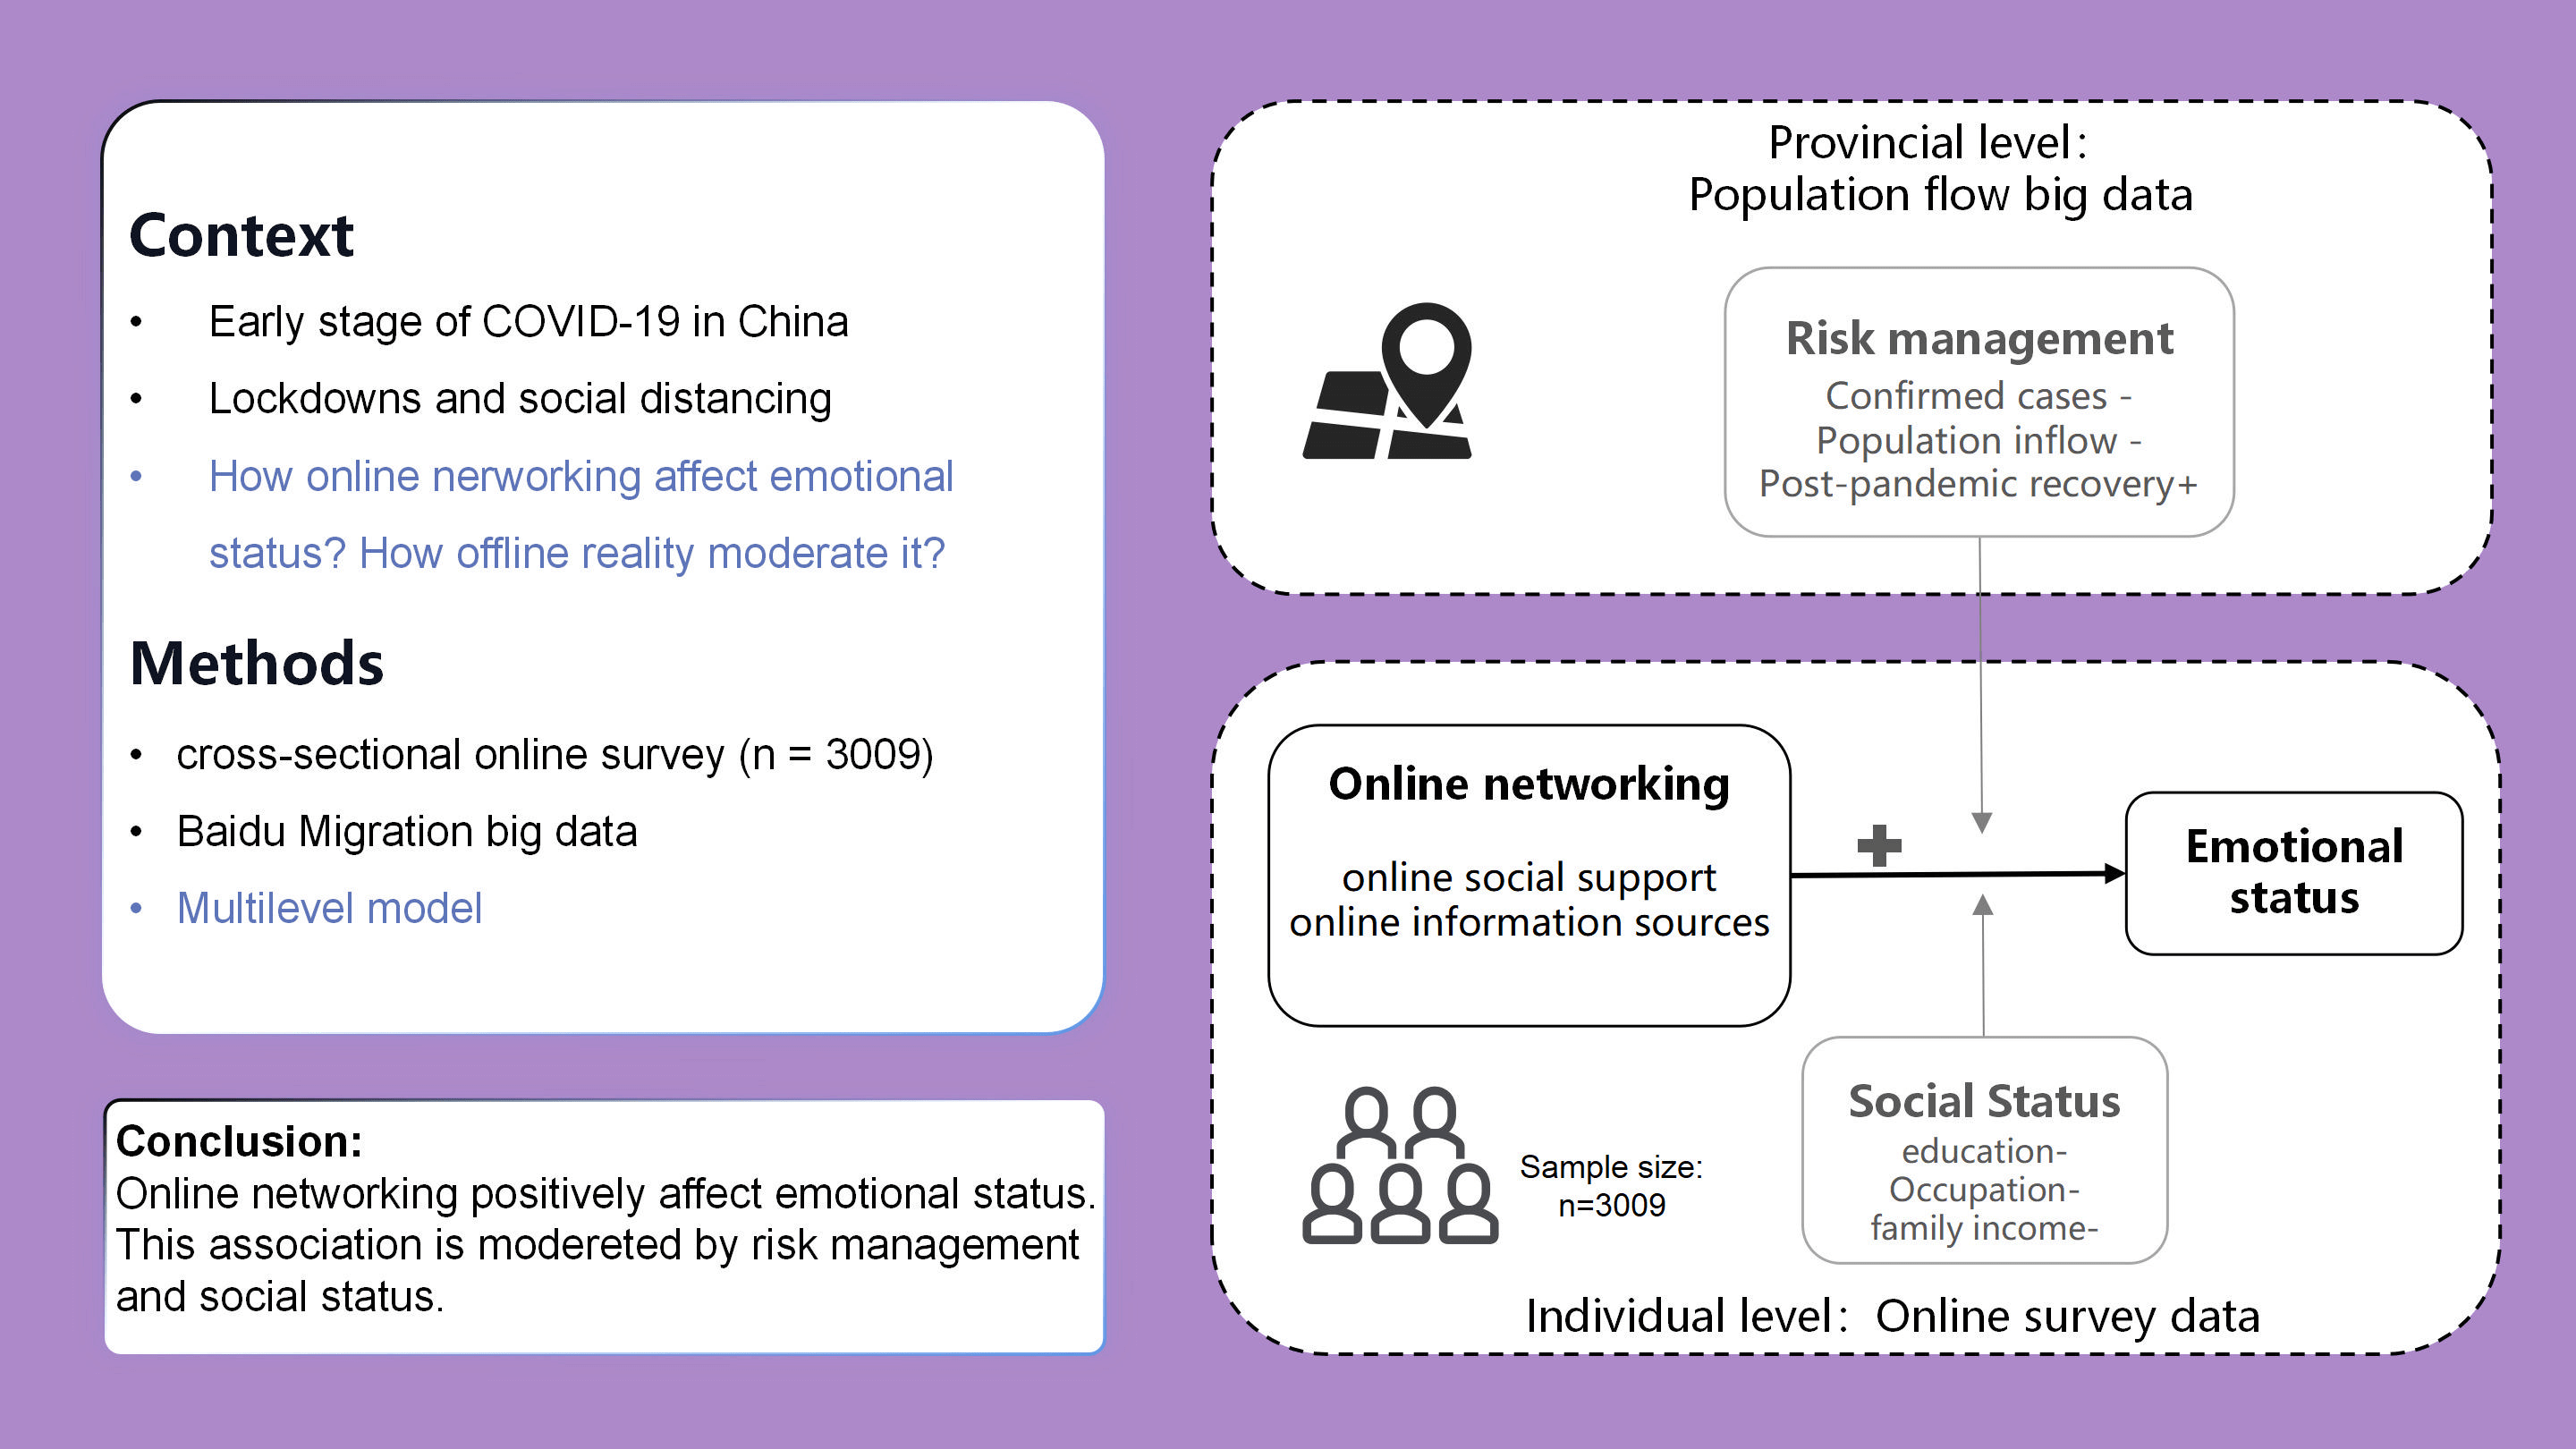 Effect of Online Social Networking on Emotional Status and Its Interaction with Offline Reality during the Early Stage of the COVID-19 Pandemic in China